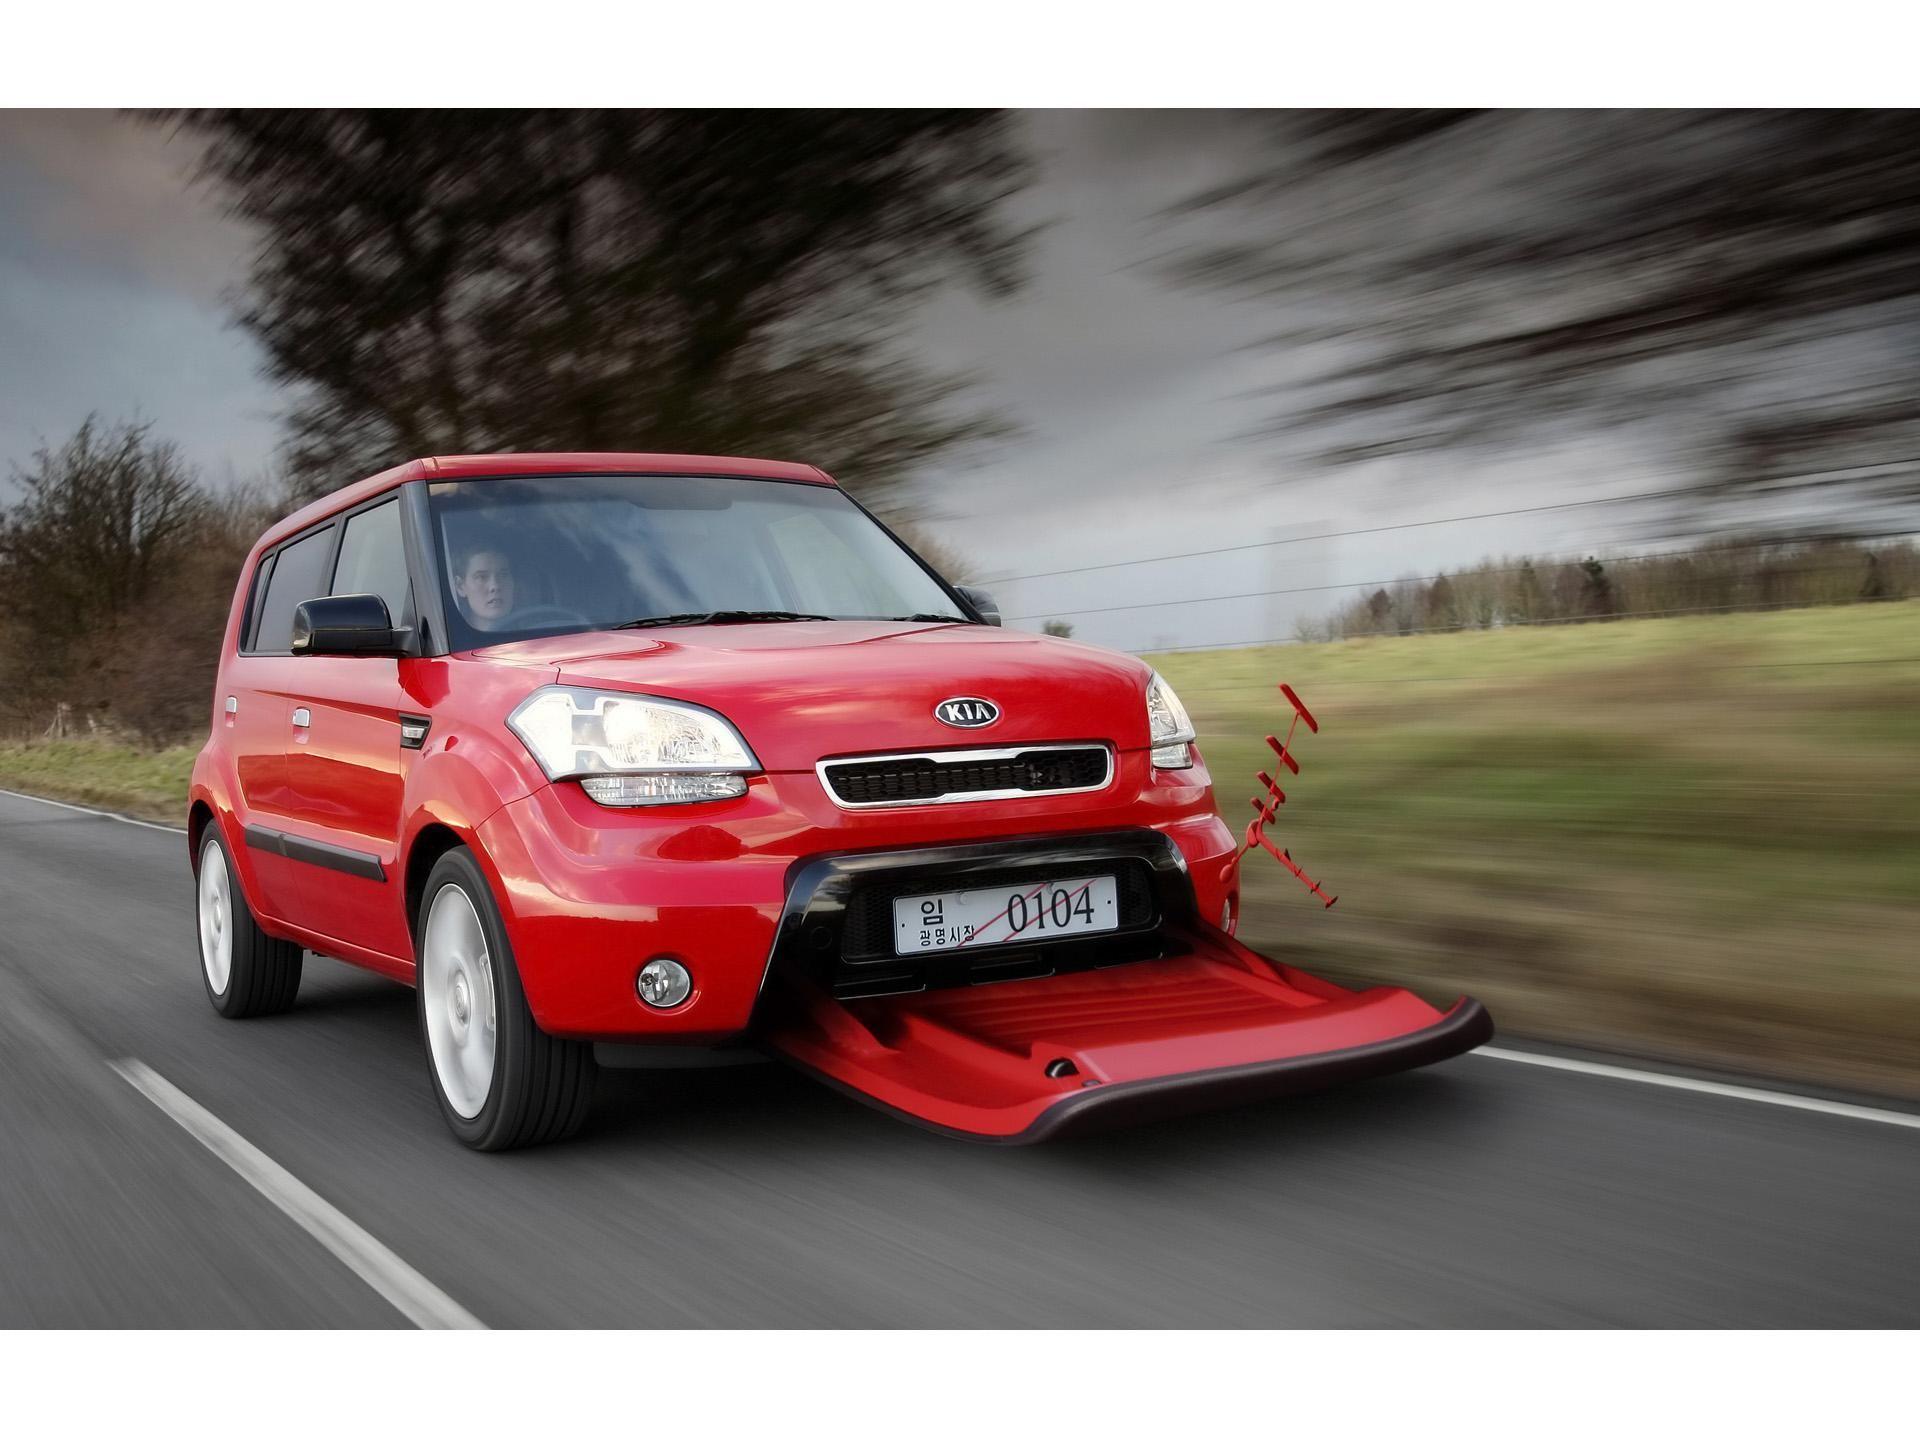 Kia Soul APRIL System News and Information